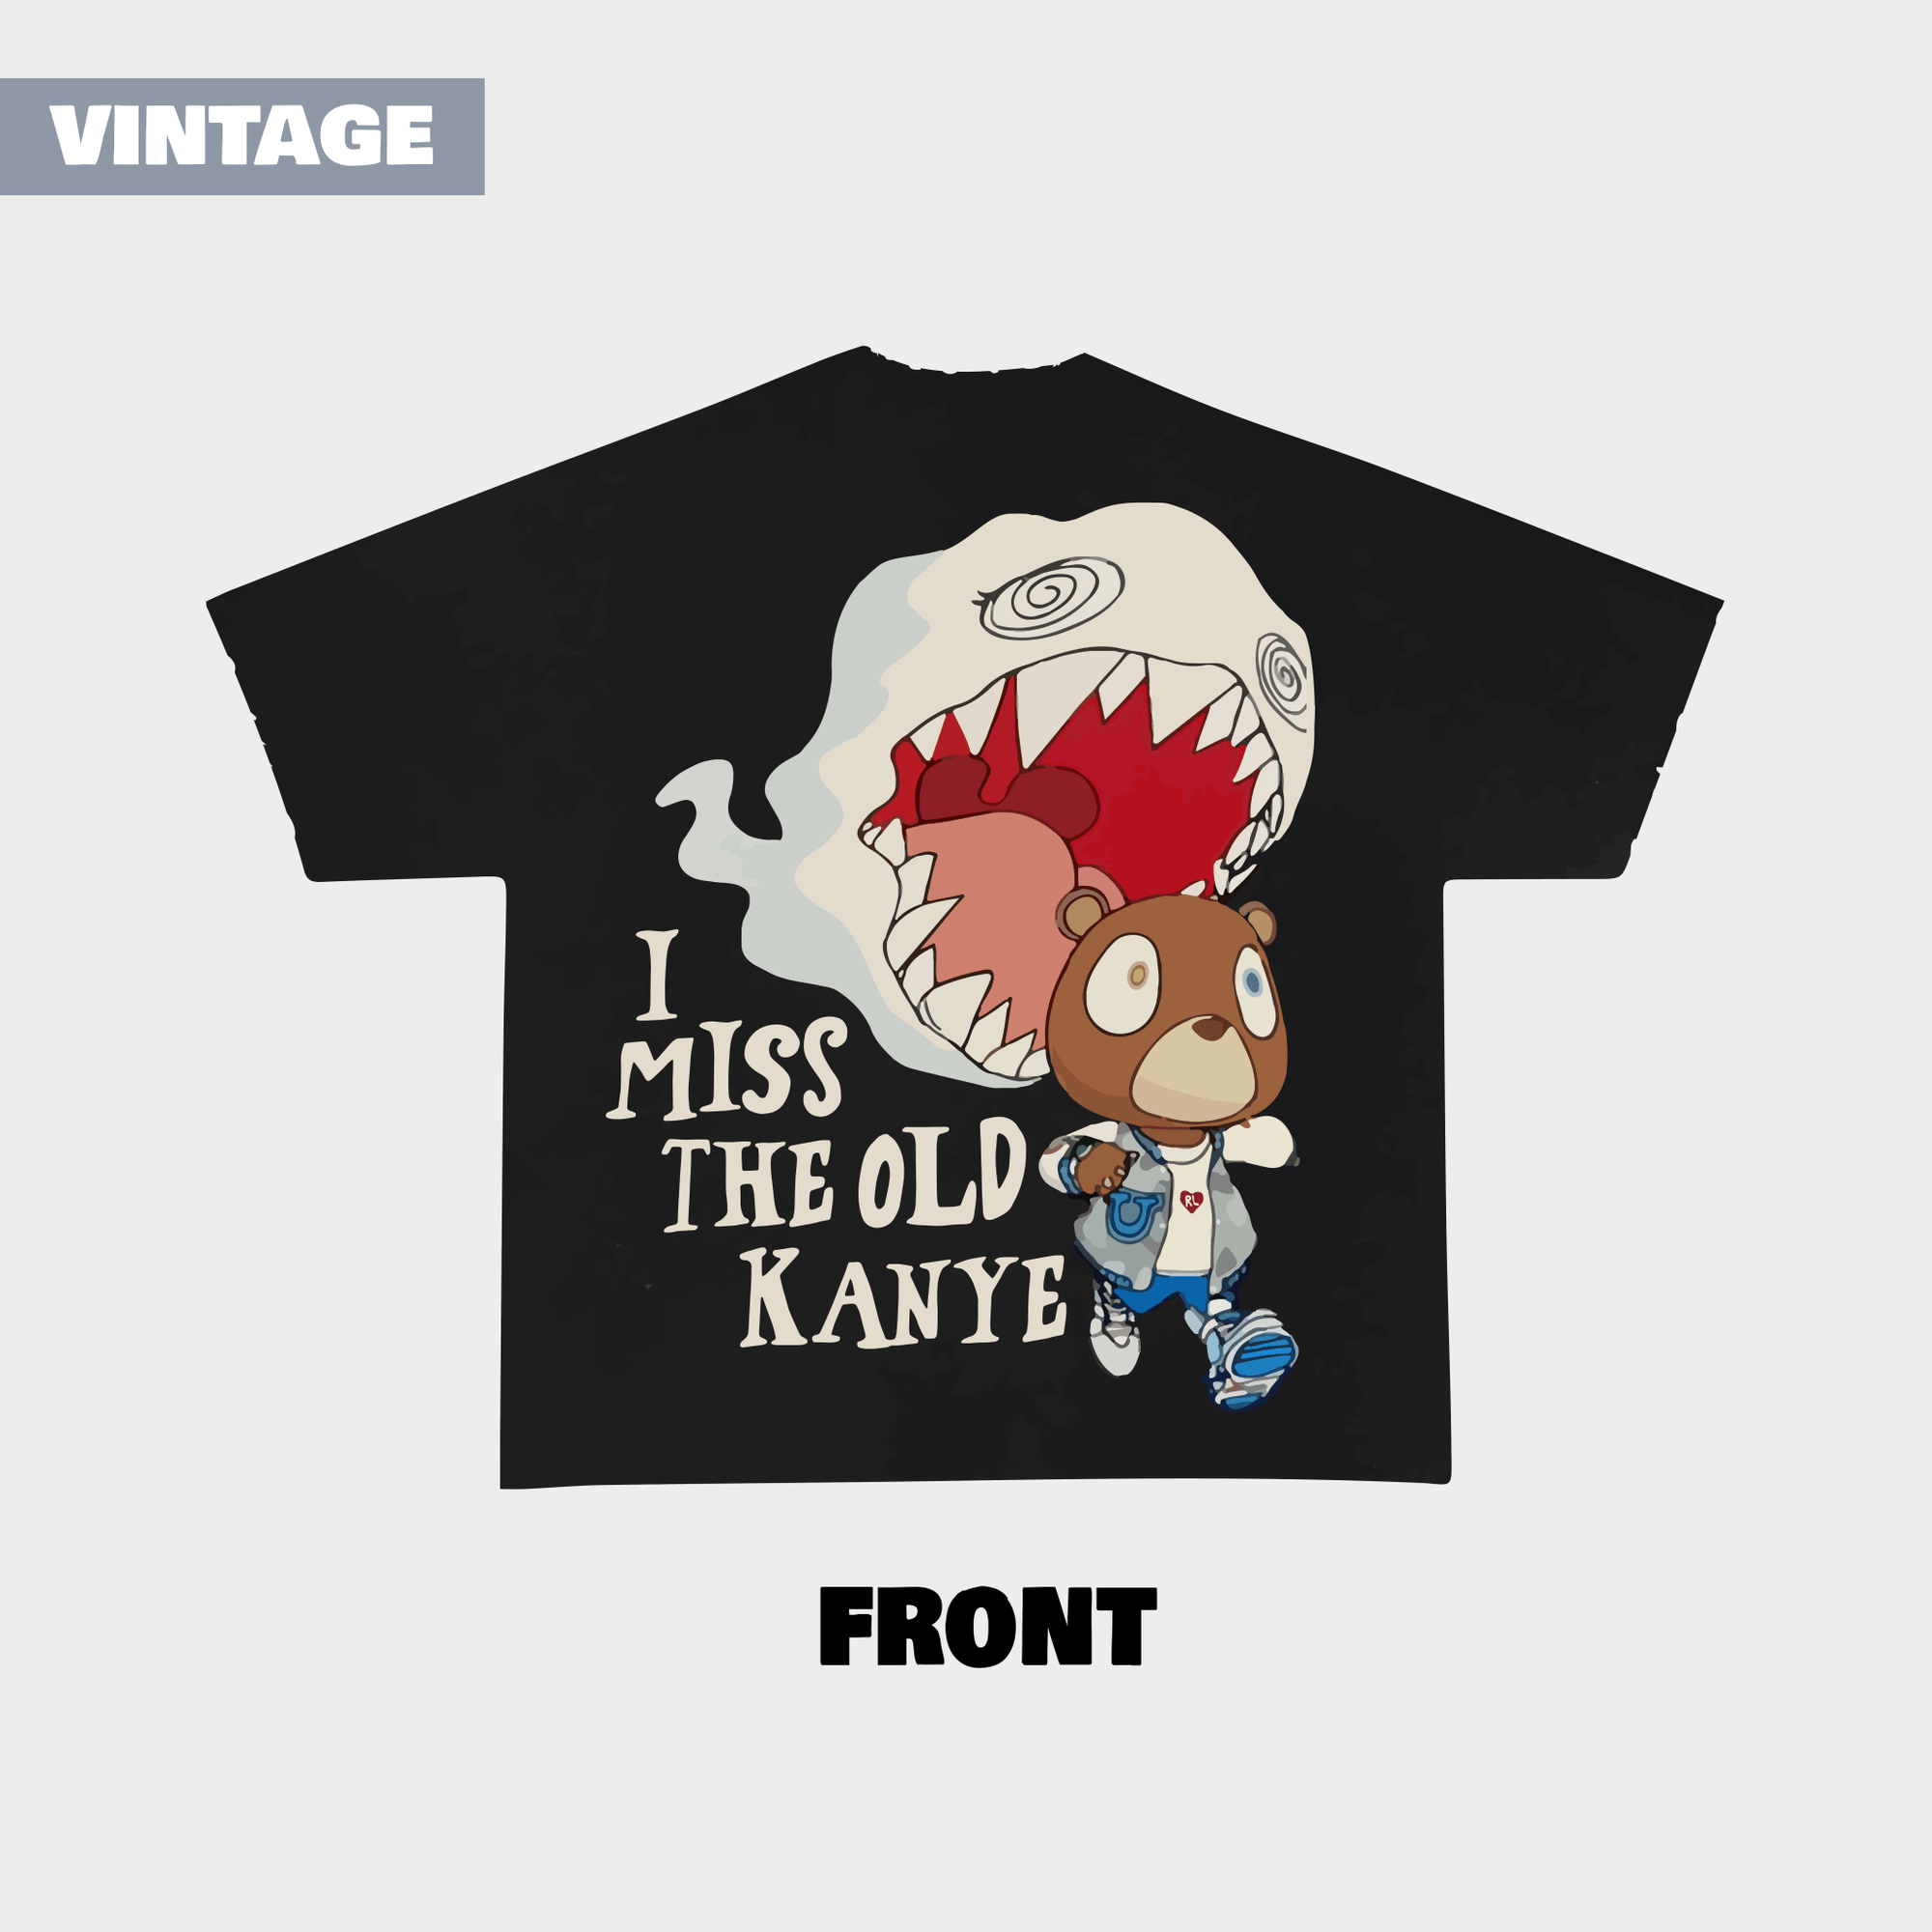 "I Miss The old Ye" Vintage Tee - RED LETTERS